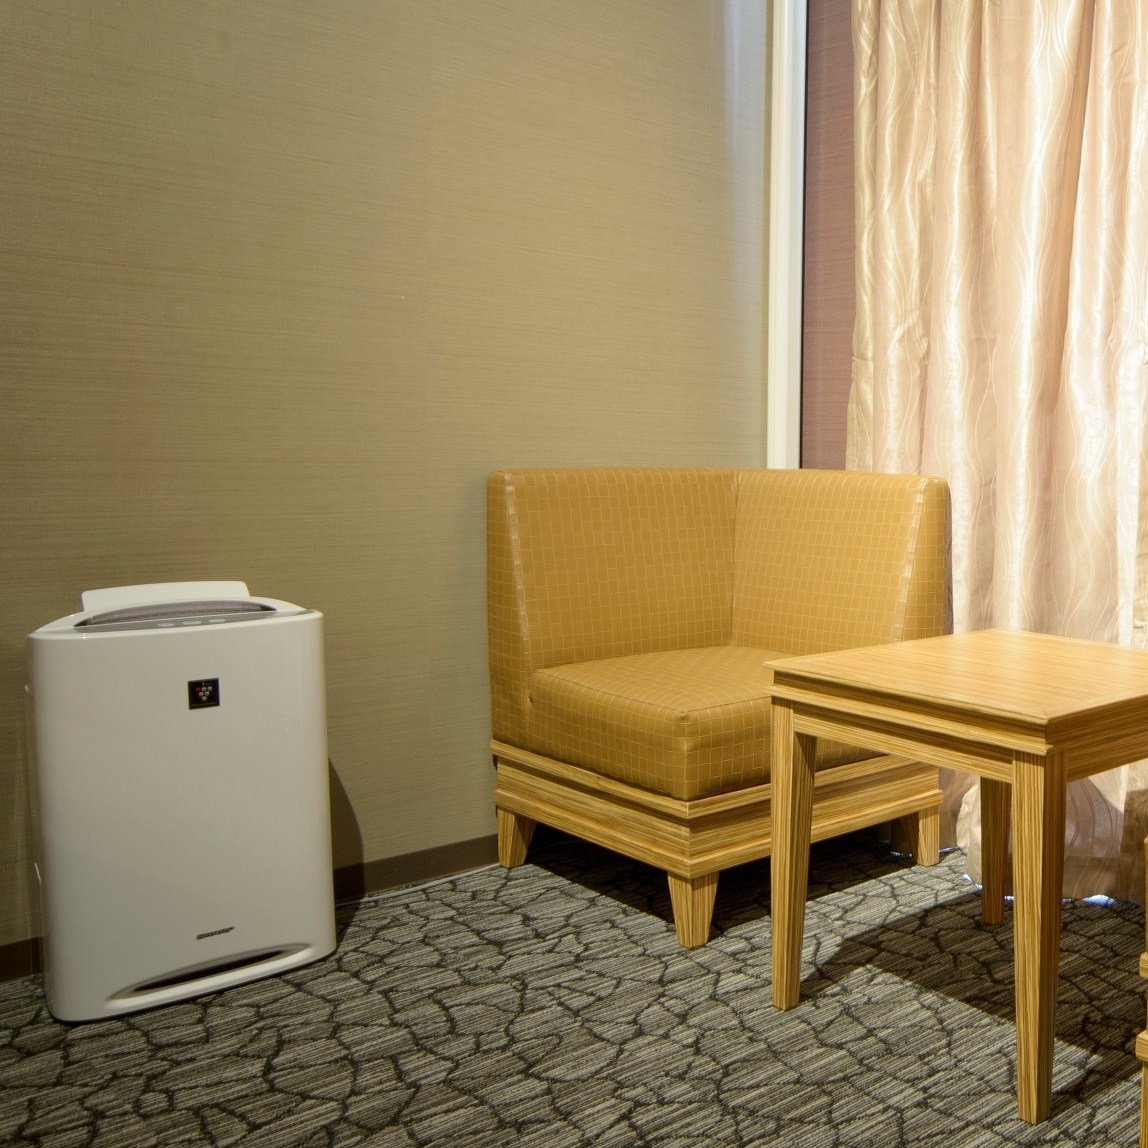 [Room facilities] Air purifier with humidification function ・ All rooms are equipped